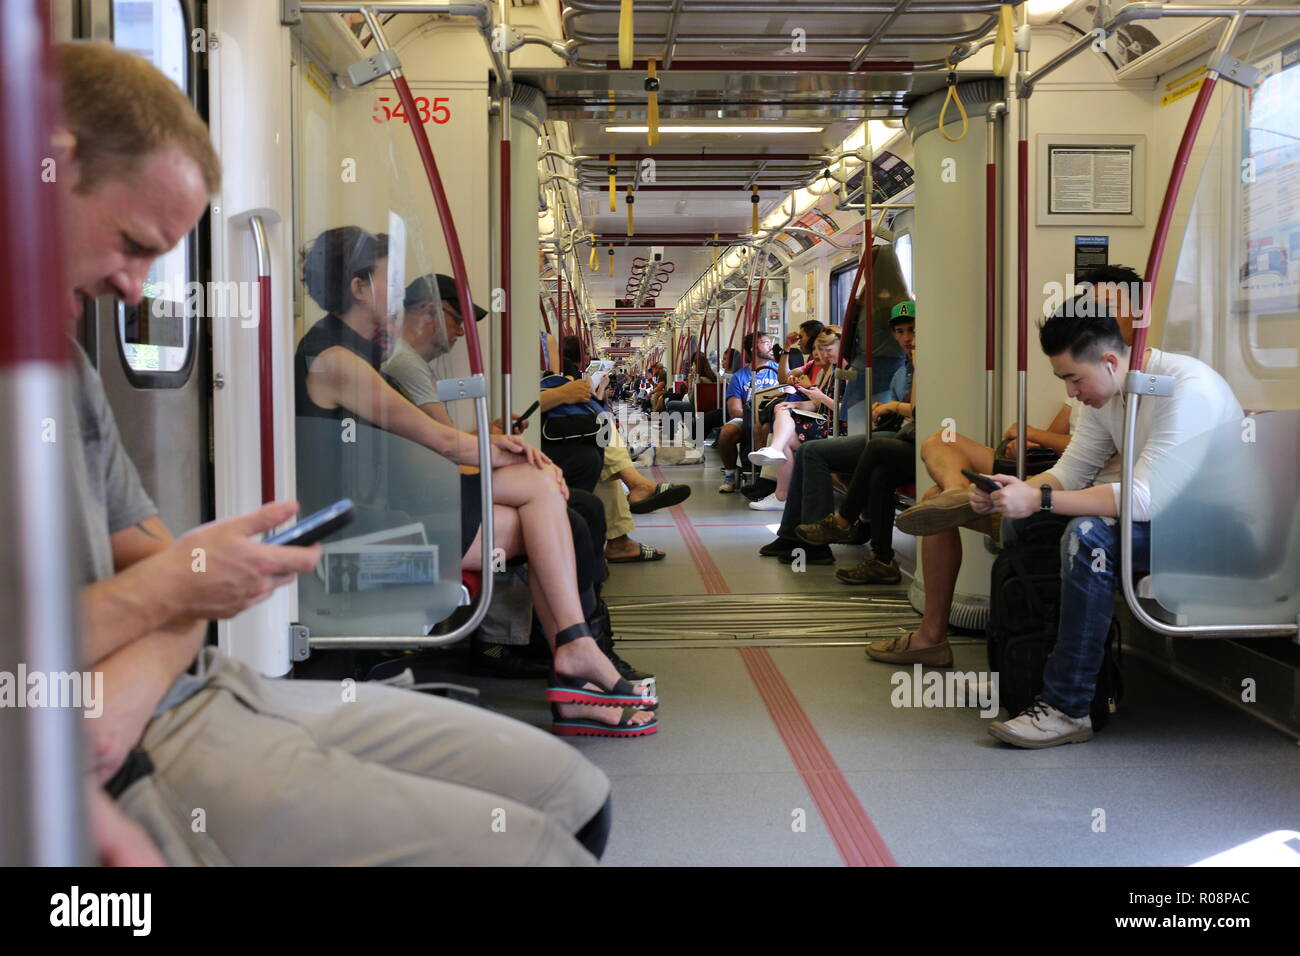 Subway interior and people looking at their phones - Toronto, Ontario, Canada. Stock Photo